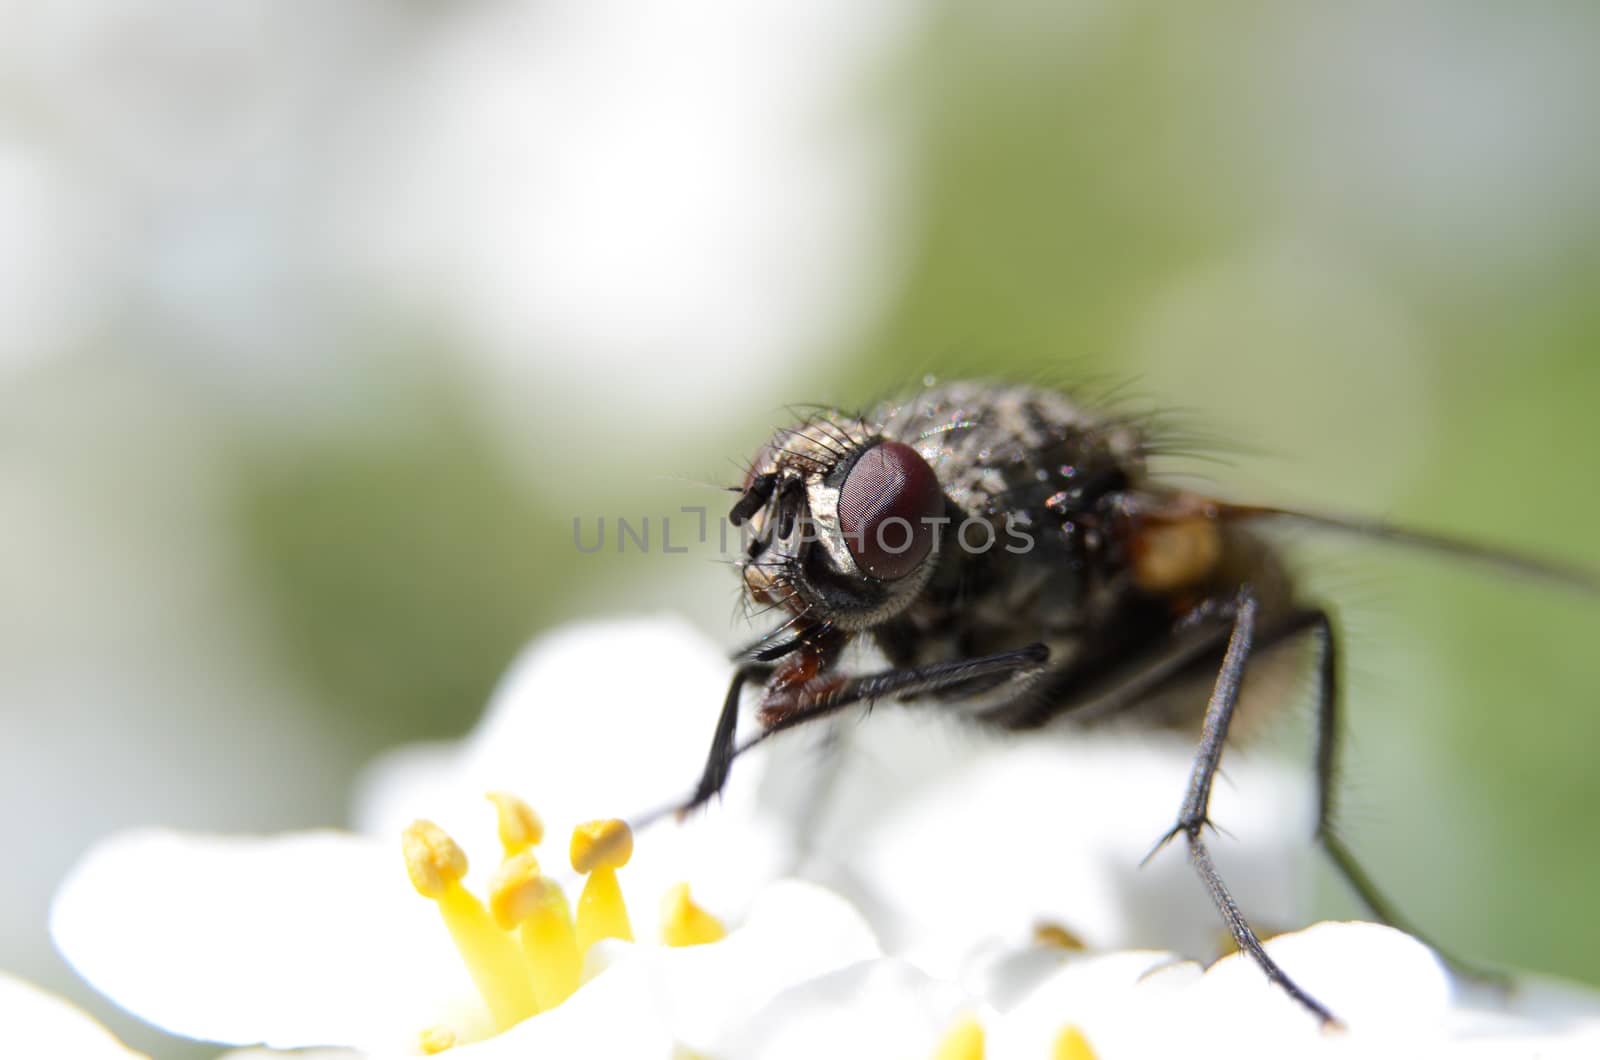 Housefly macro by pljvv